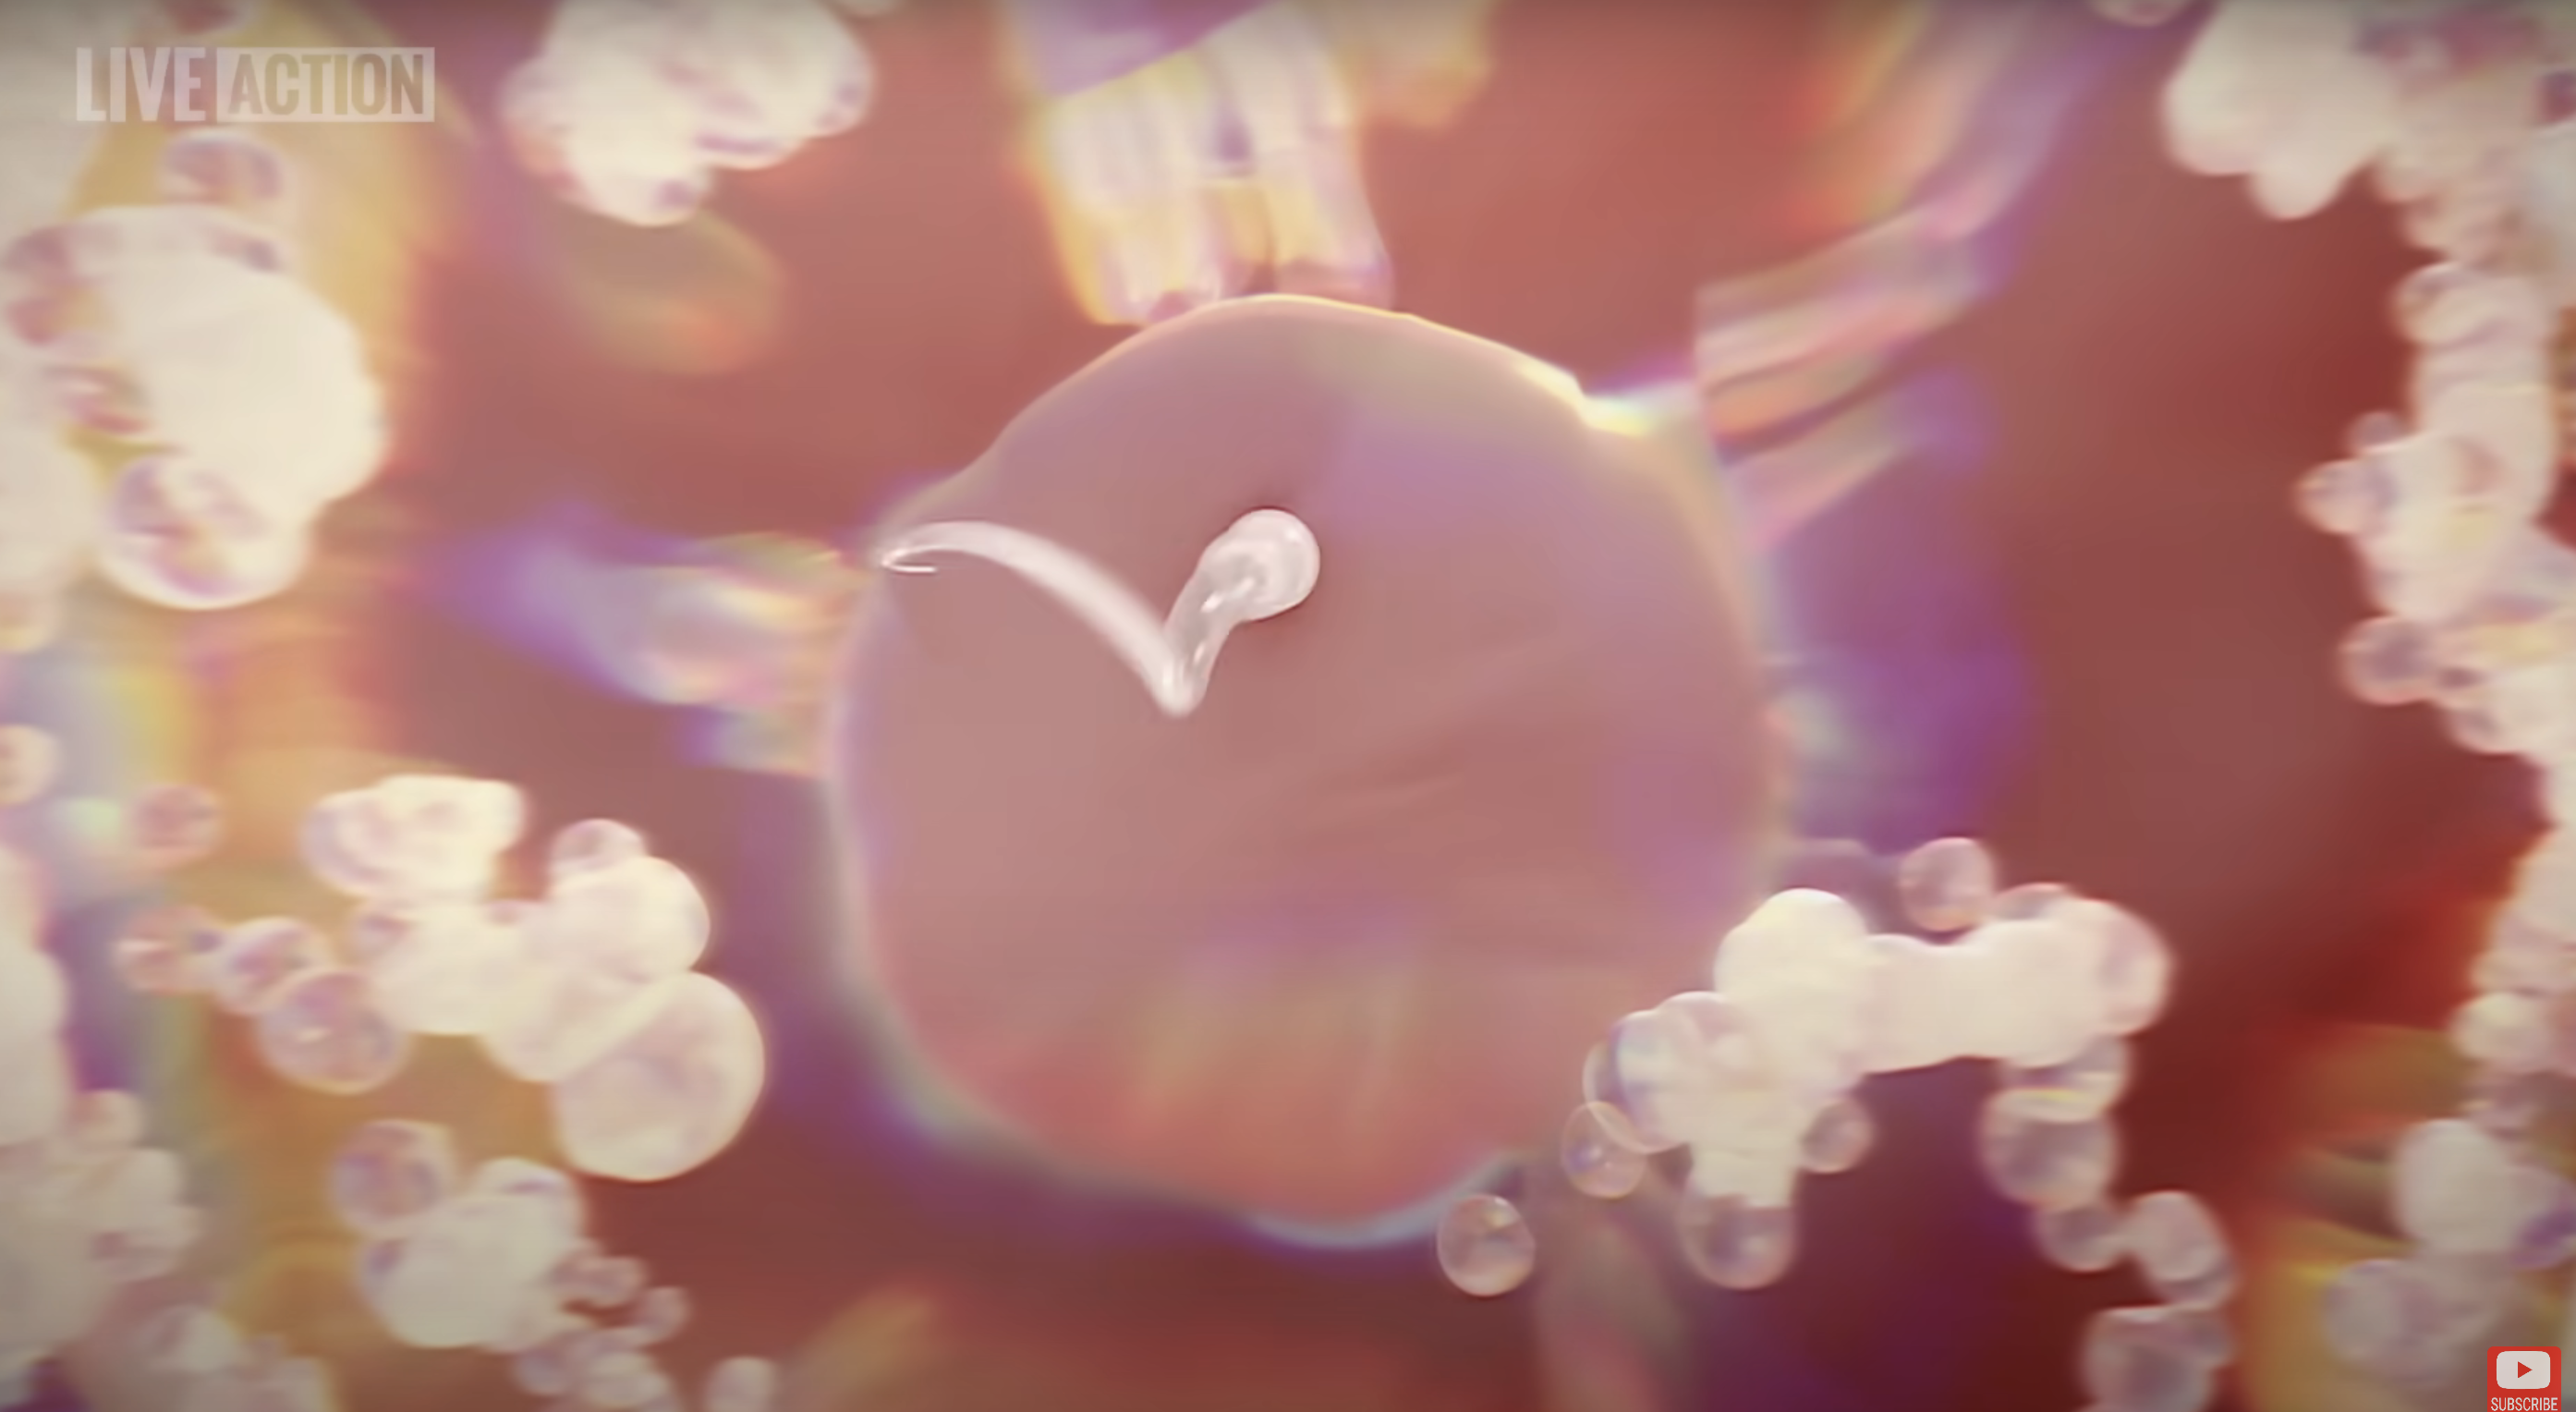 A digital animation of a sperm cell swimming toward an egg, representing fertilization. The background has a soft, abstract design with floating particles